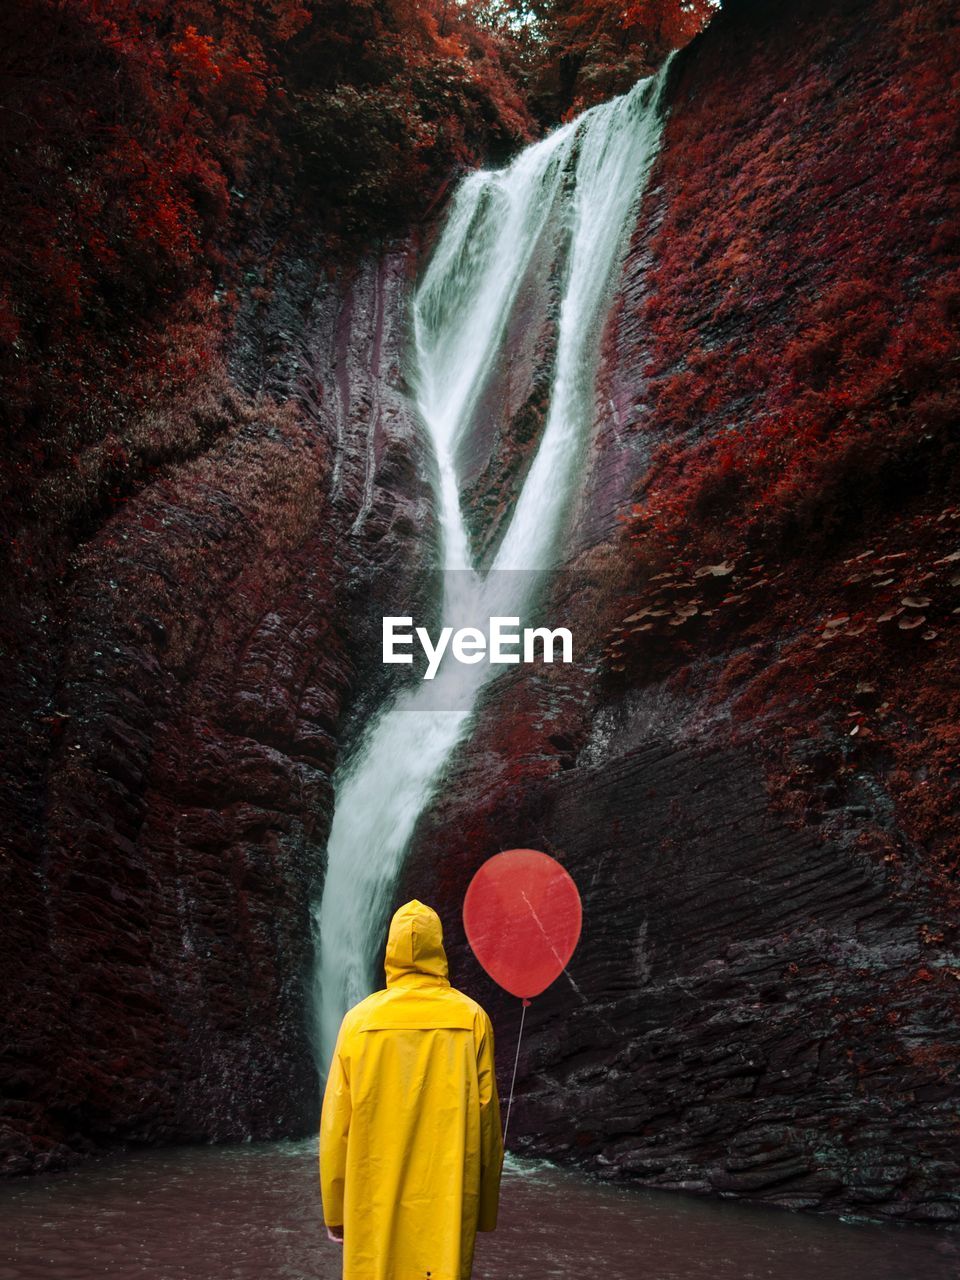 Rear view of person holding balloon against waterfall